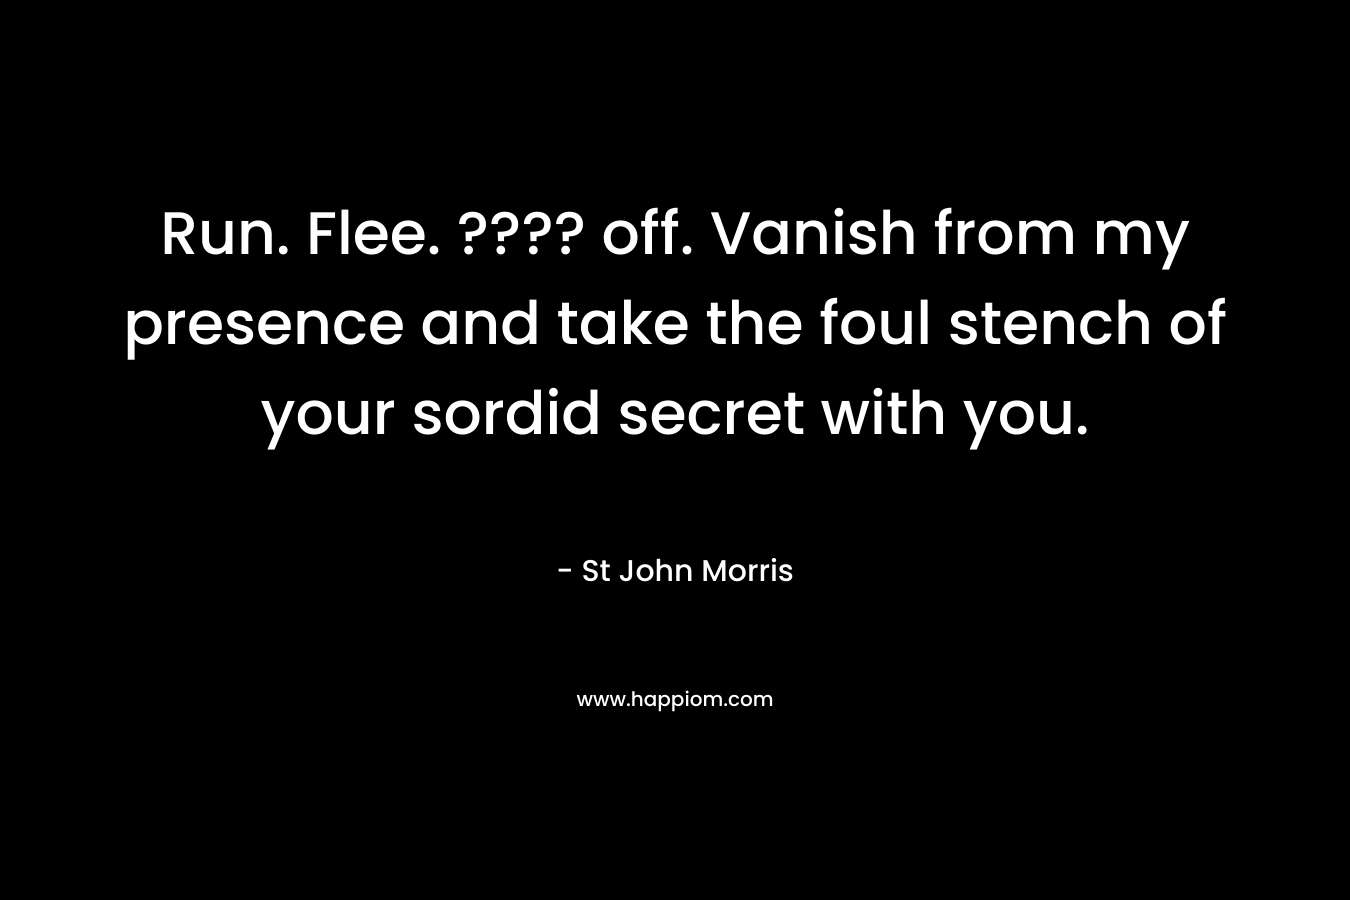 Run. Flee. ???? off. Vanish from my presence and take the foul stench of your sordid secret with you. – St John Morris